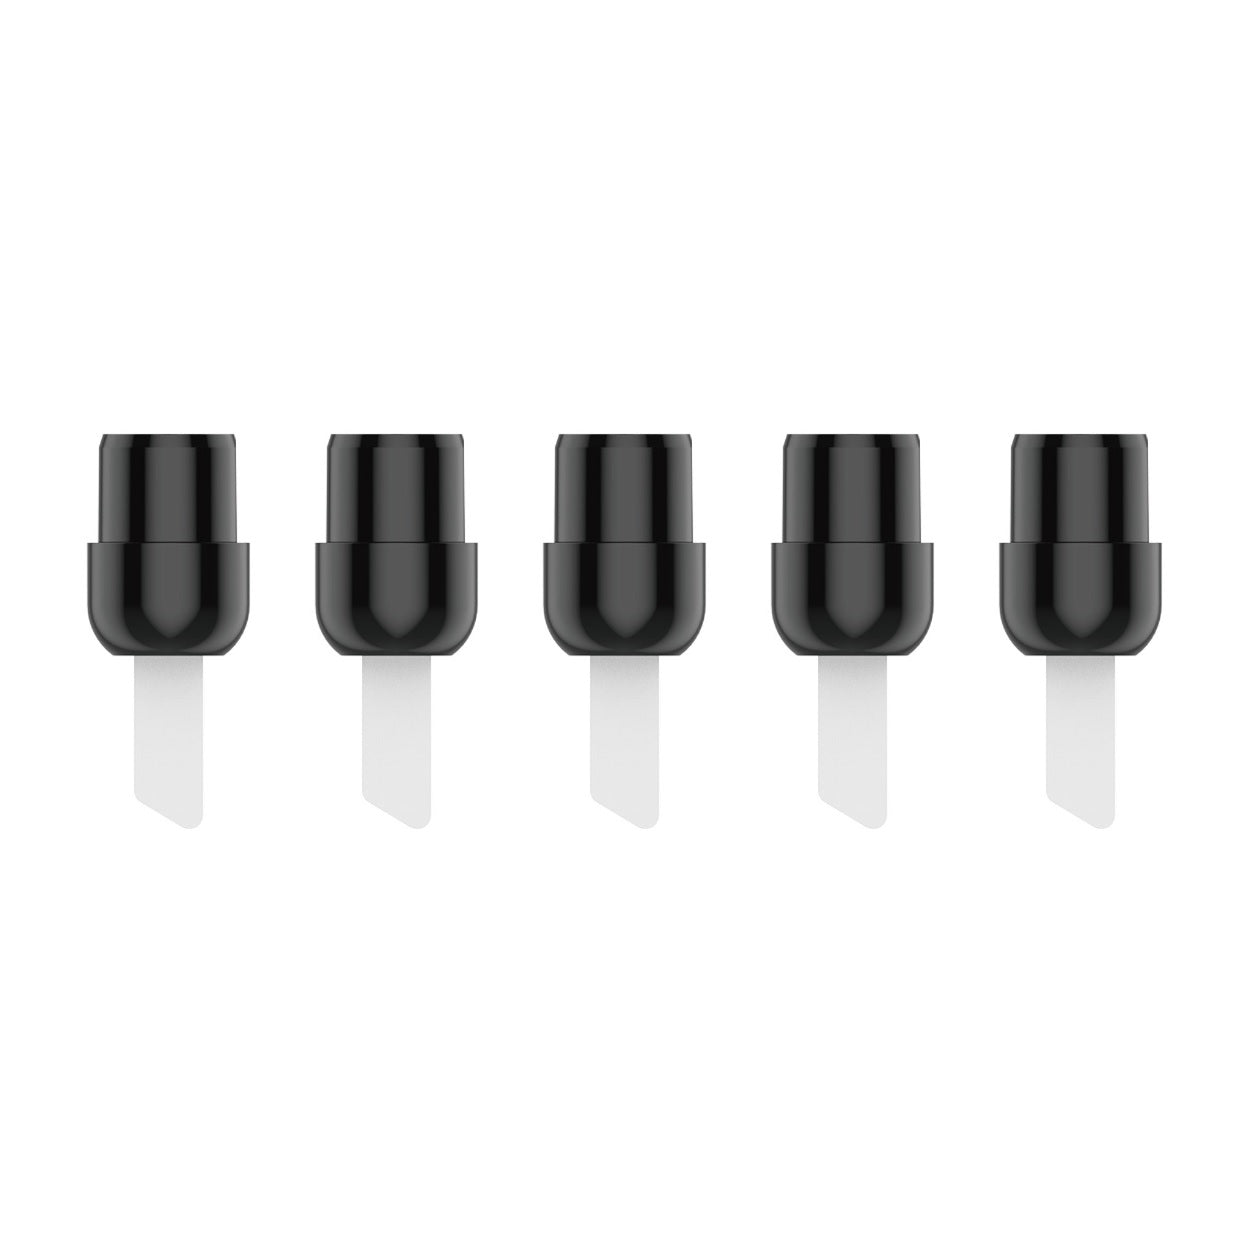 Yocan Black JAWS Magnetic Ceramic Hot Knife - 5 Pieces